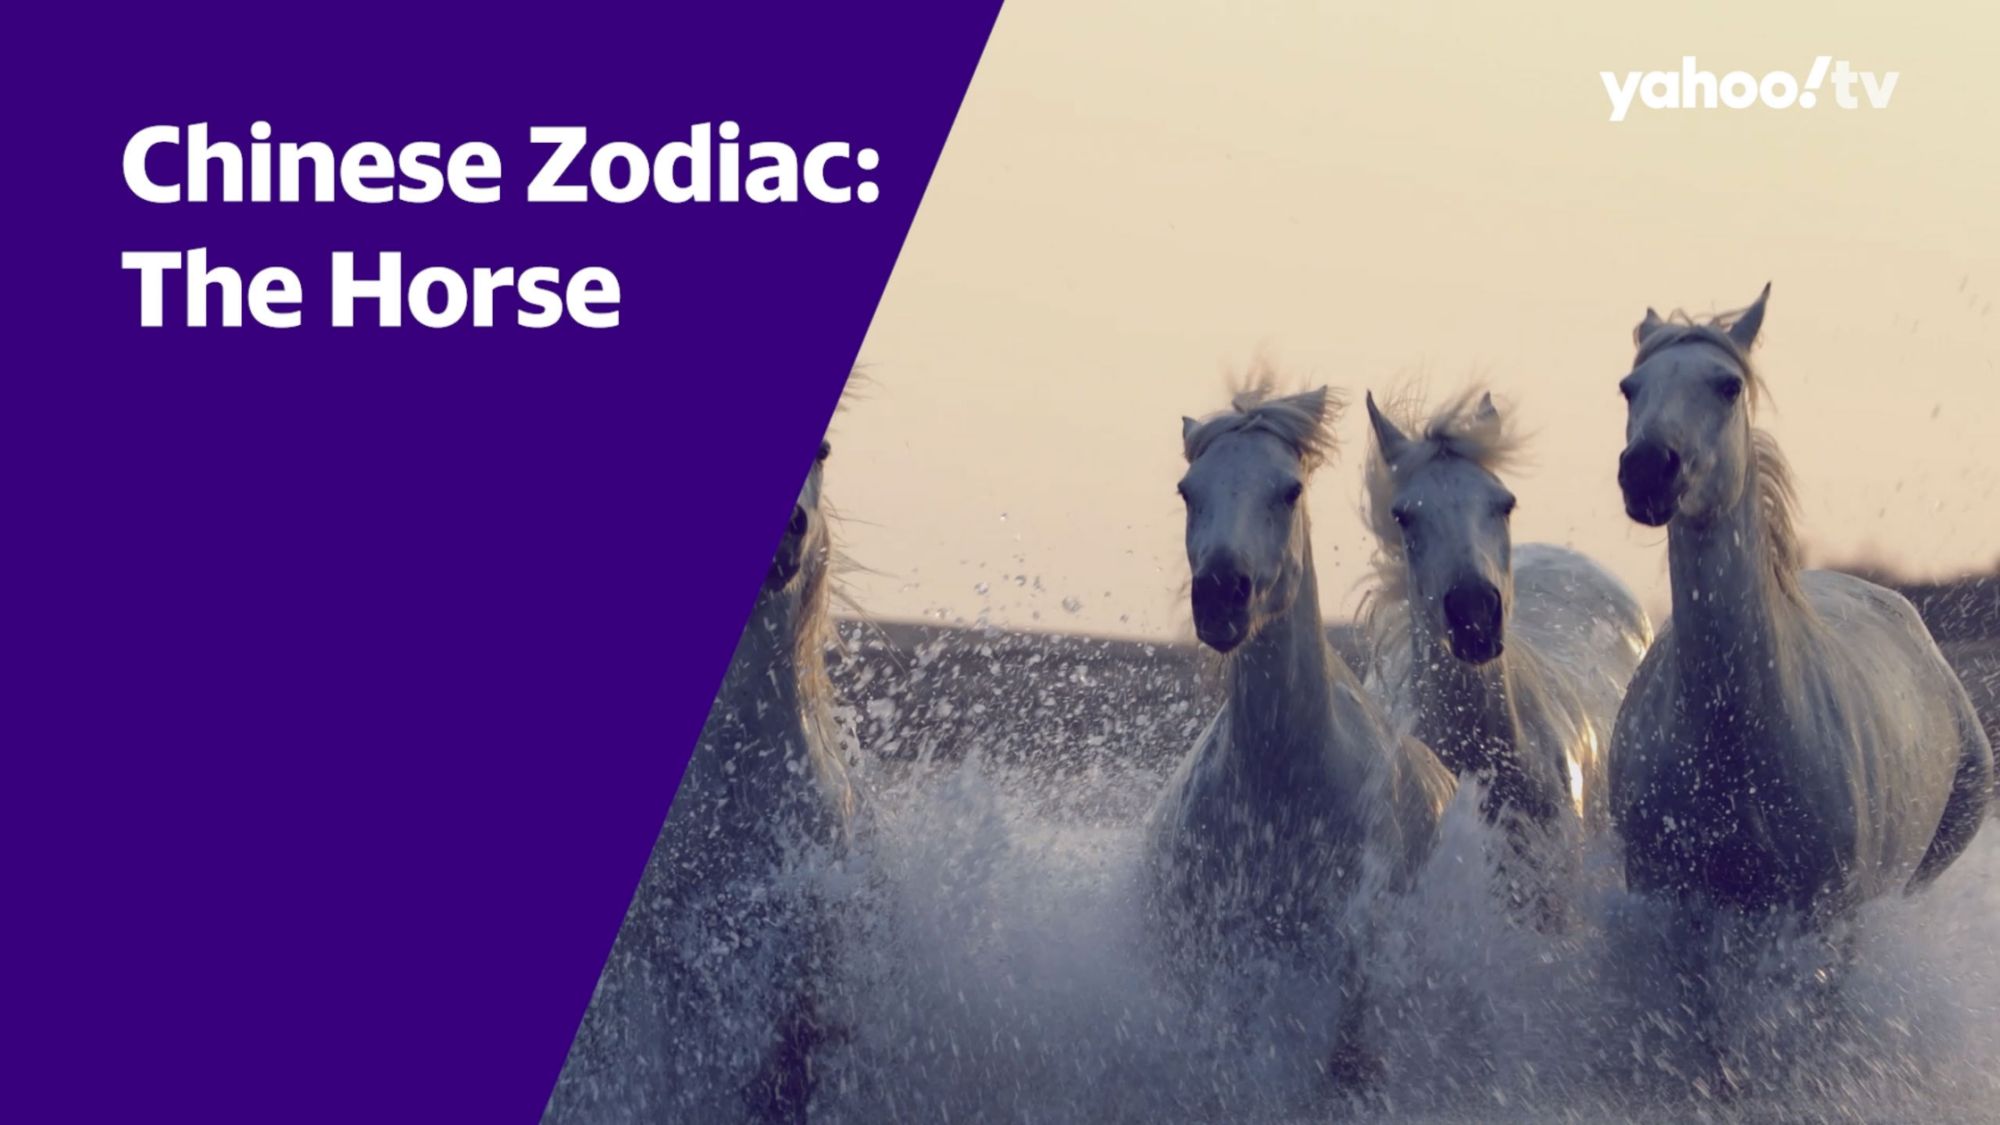 About the Chinese Zodiac: The Horse